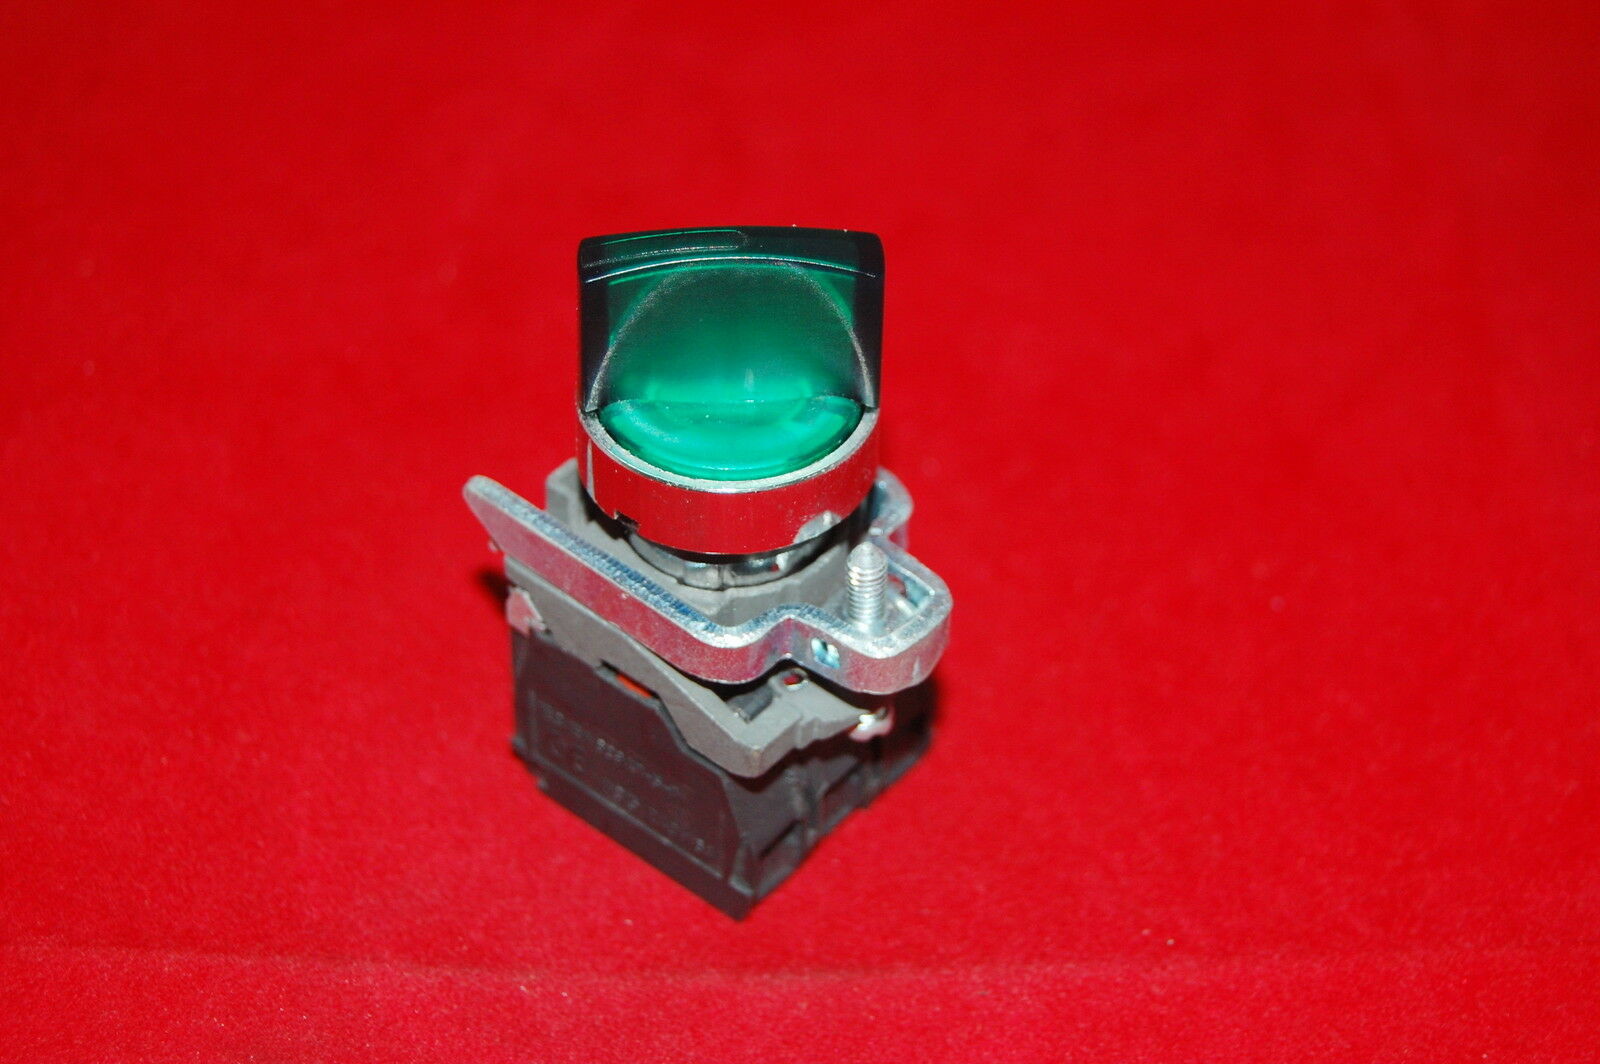 1PC 22mm ILlUMINATED Selector switch 2 Position Fits Green XB4BK123G5 120V LED